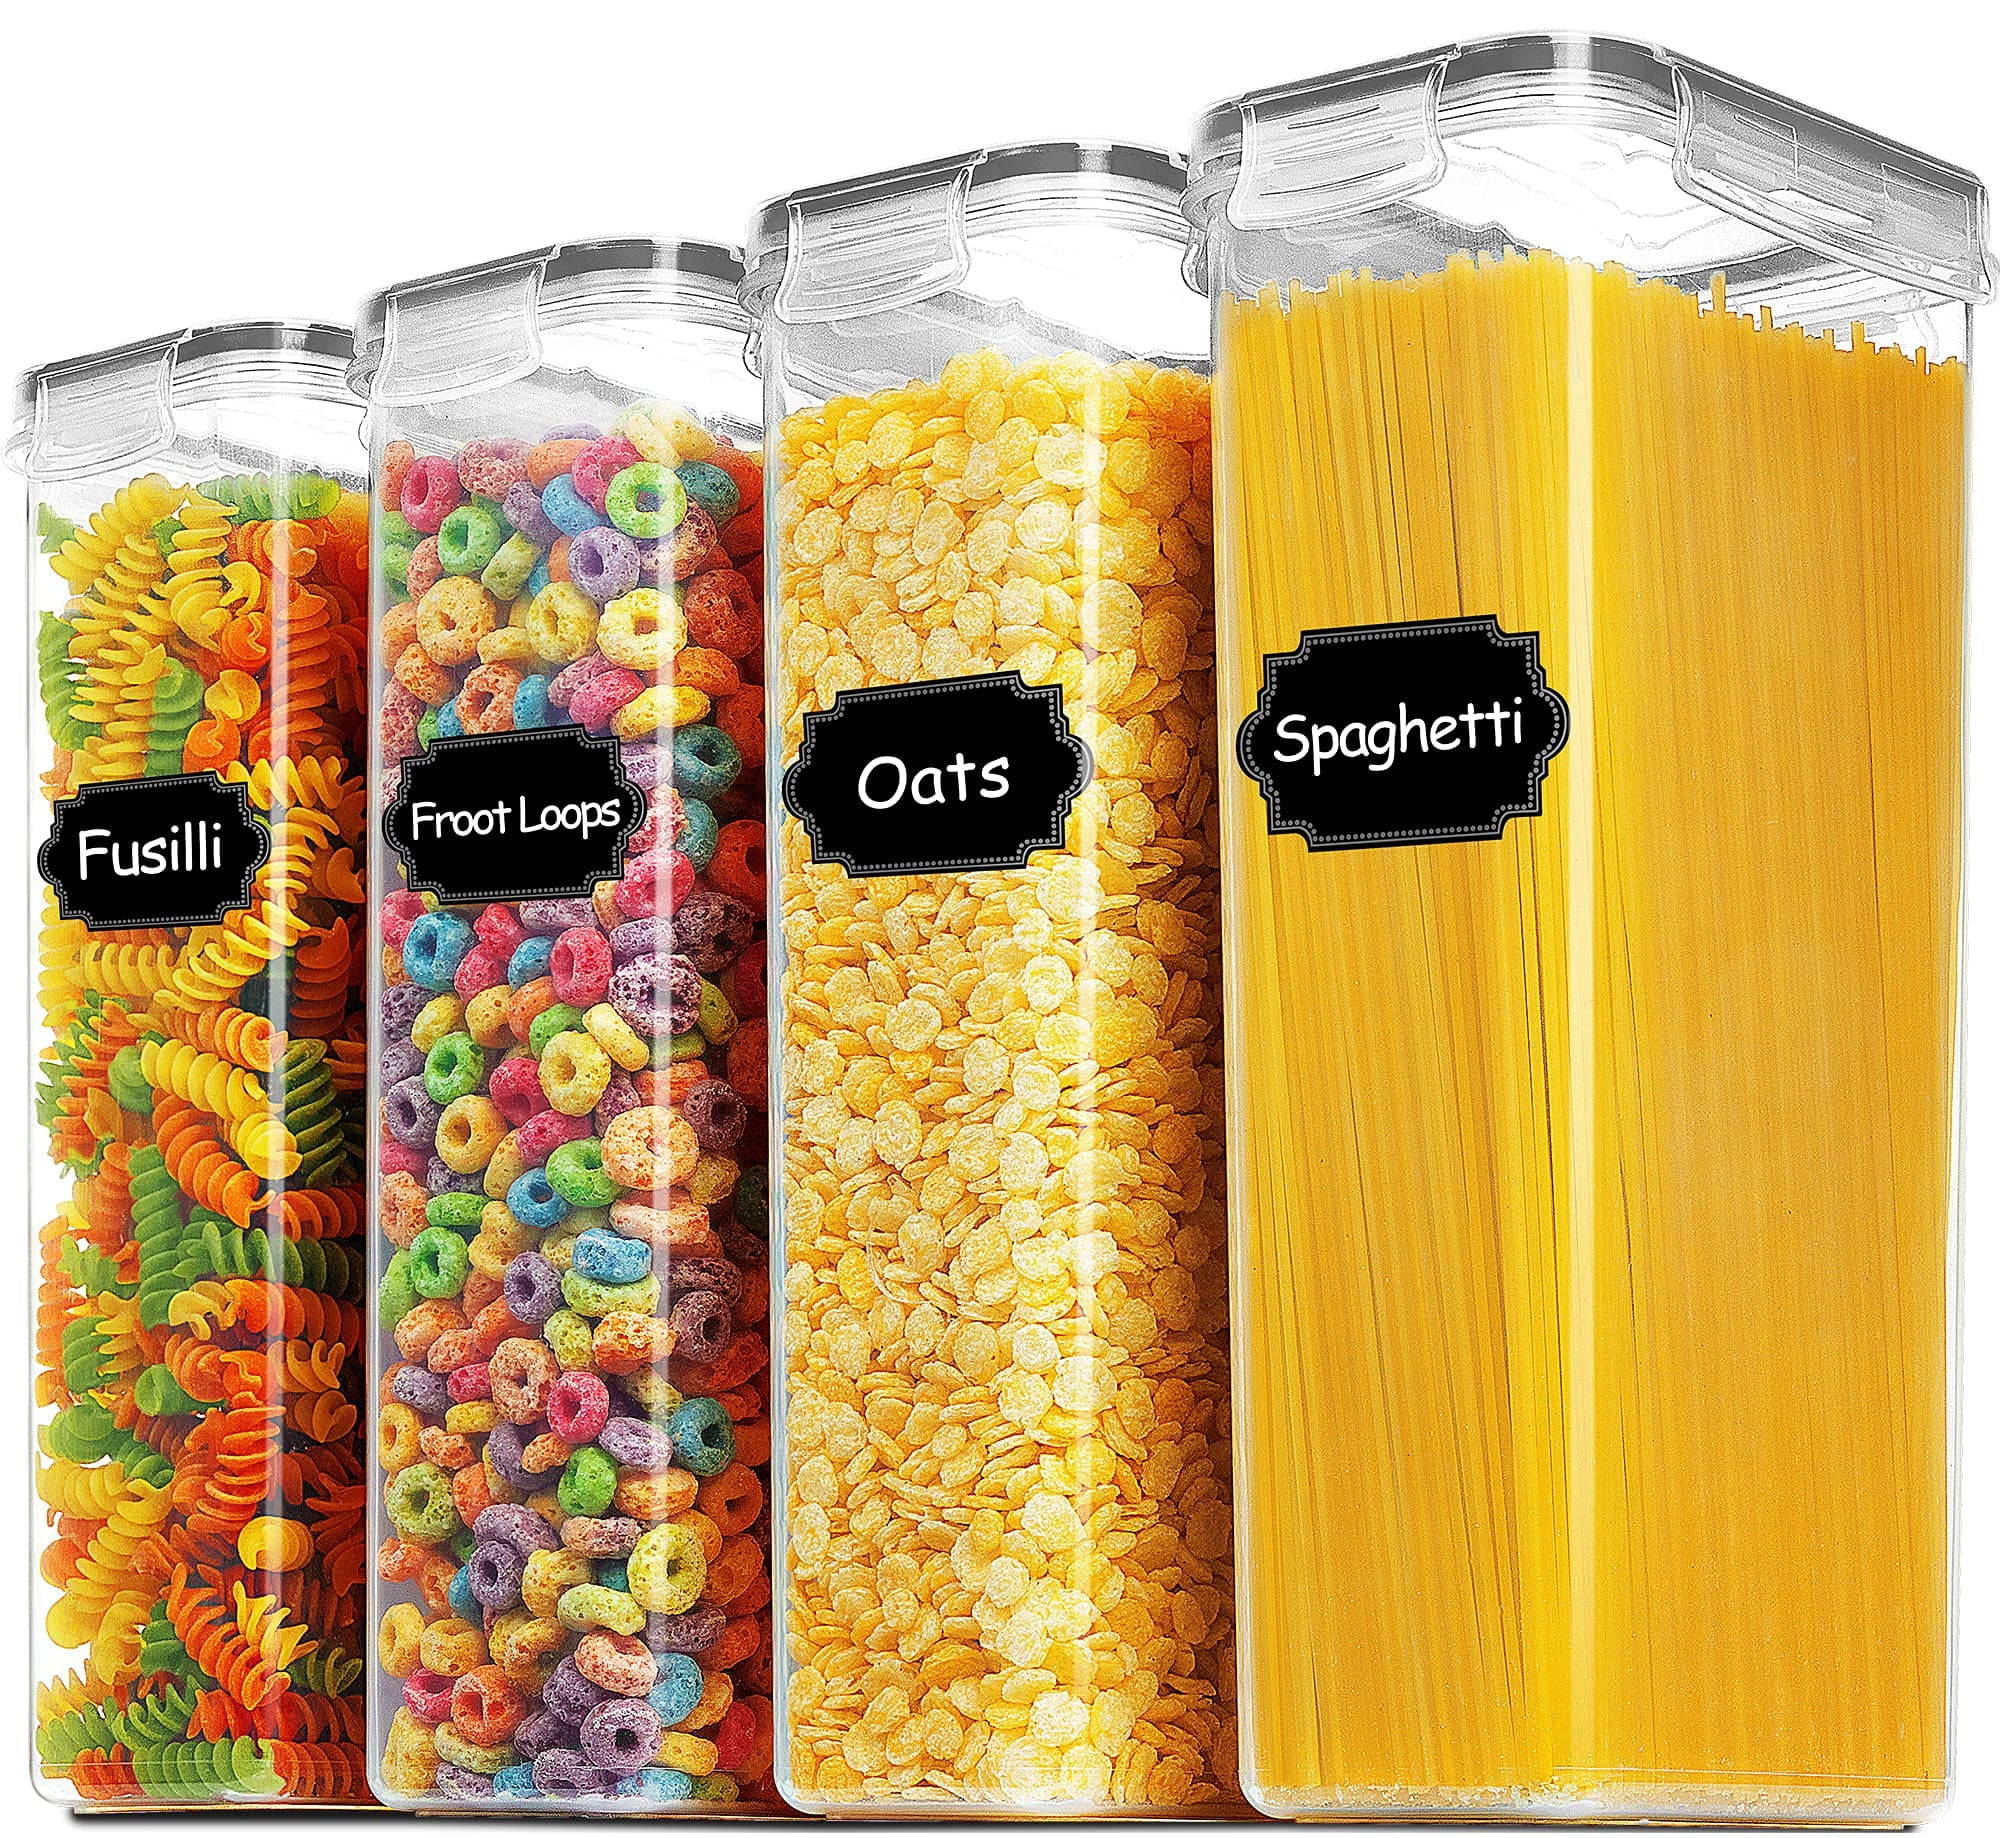 Large Capacity Kitchen Pantry Spaghetti Snacks Dry Food Container Airtight  Leakproof Cereal Storage Box for Grain Flour Pasta